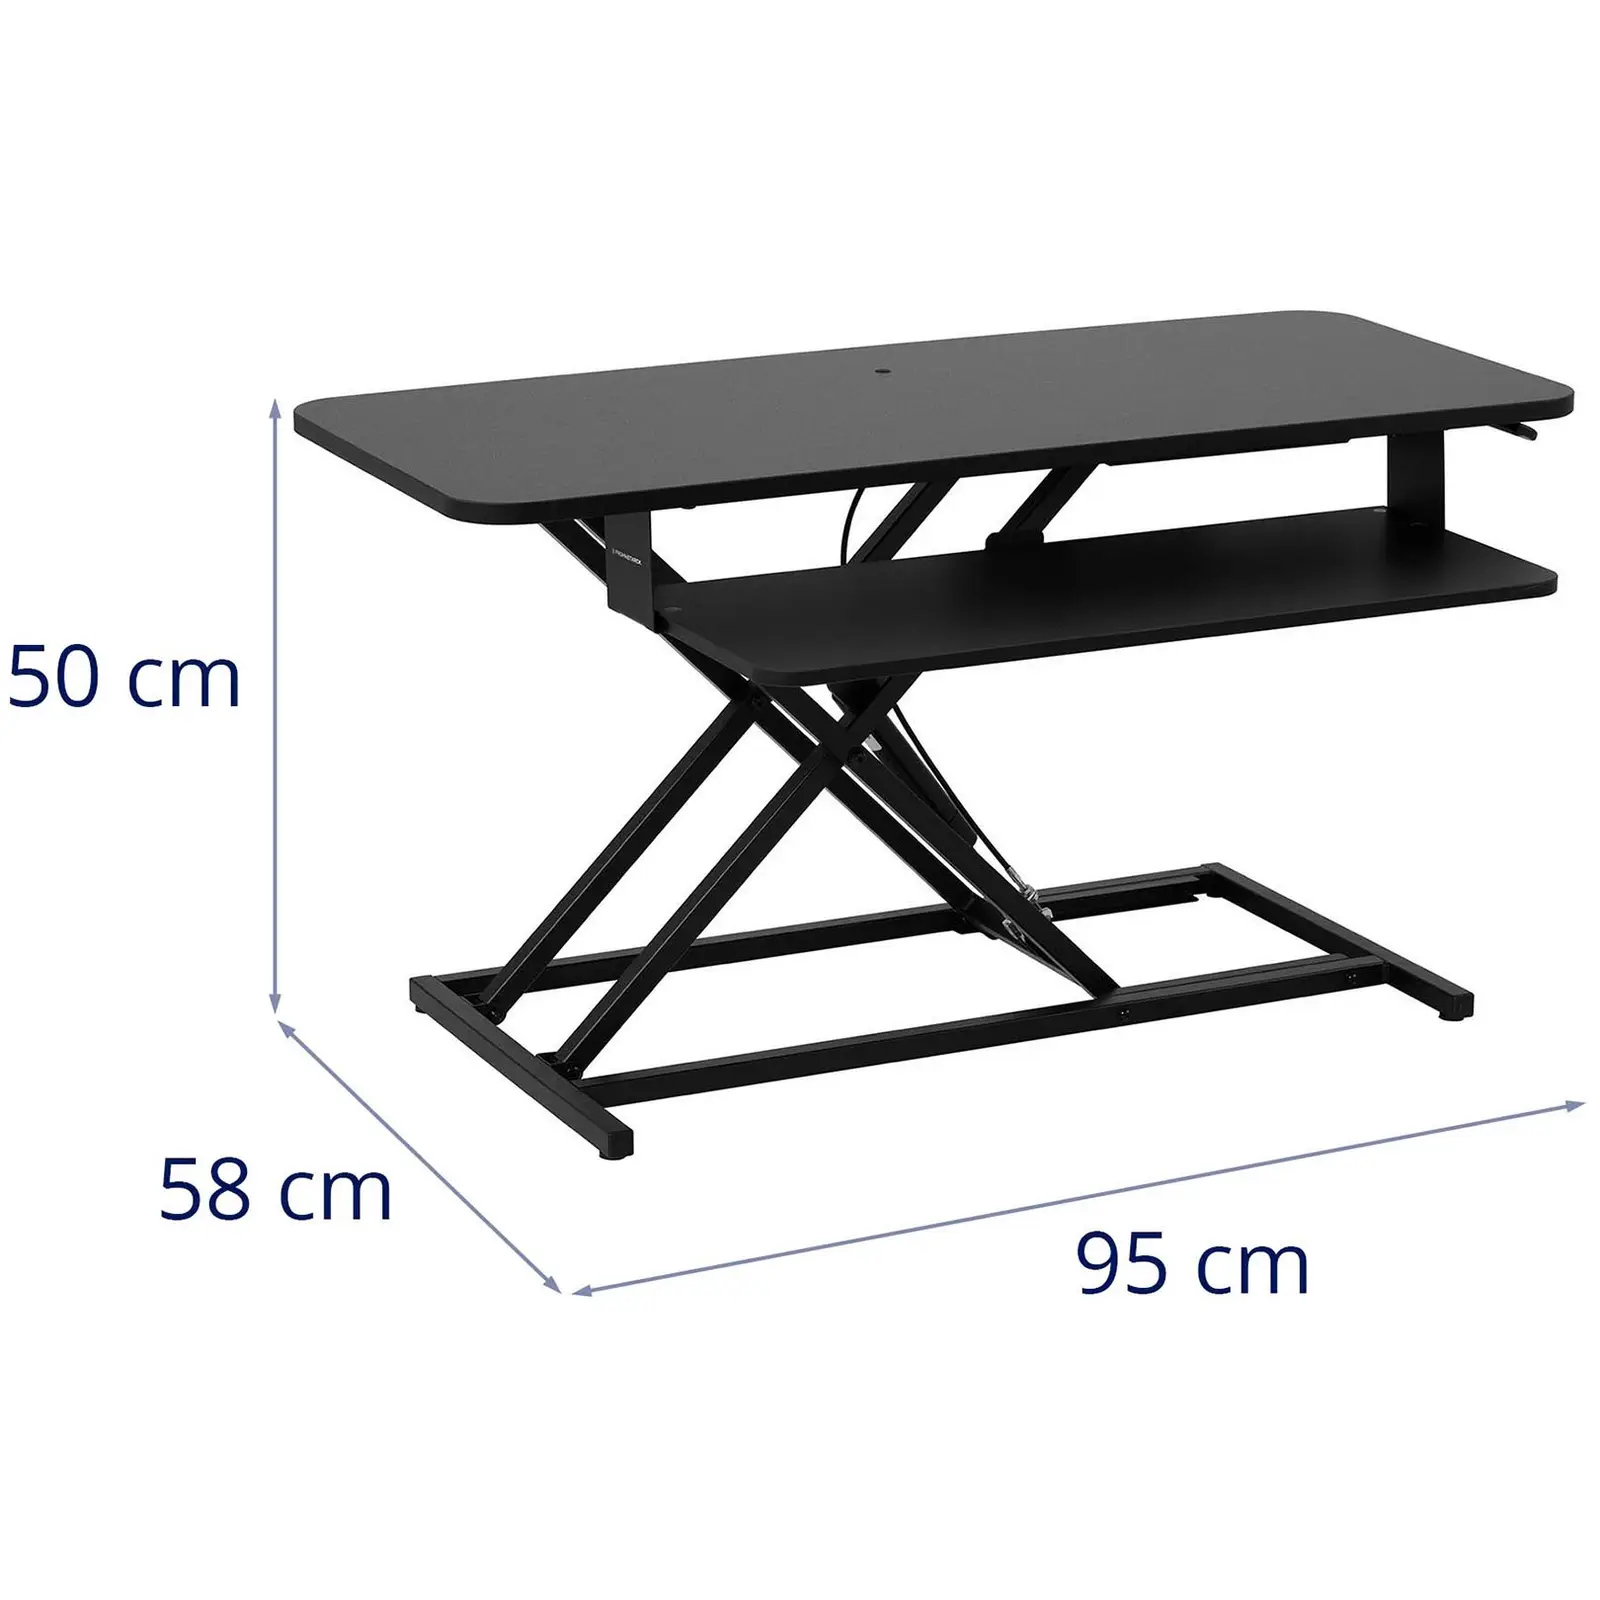 sit-stand desk - sit-stand riser - height adjustable 115 - 500 mm